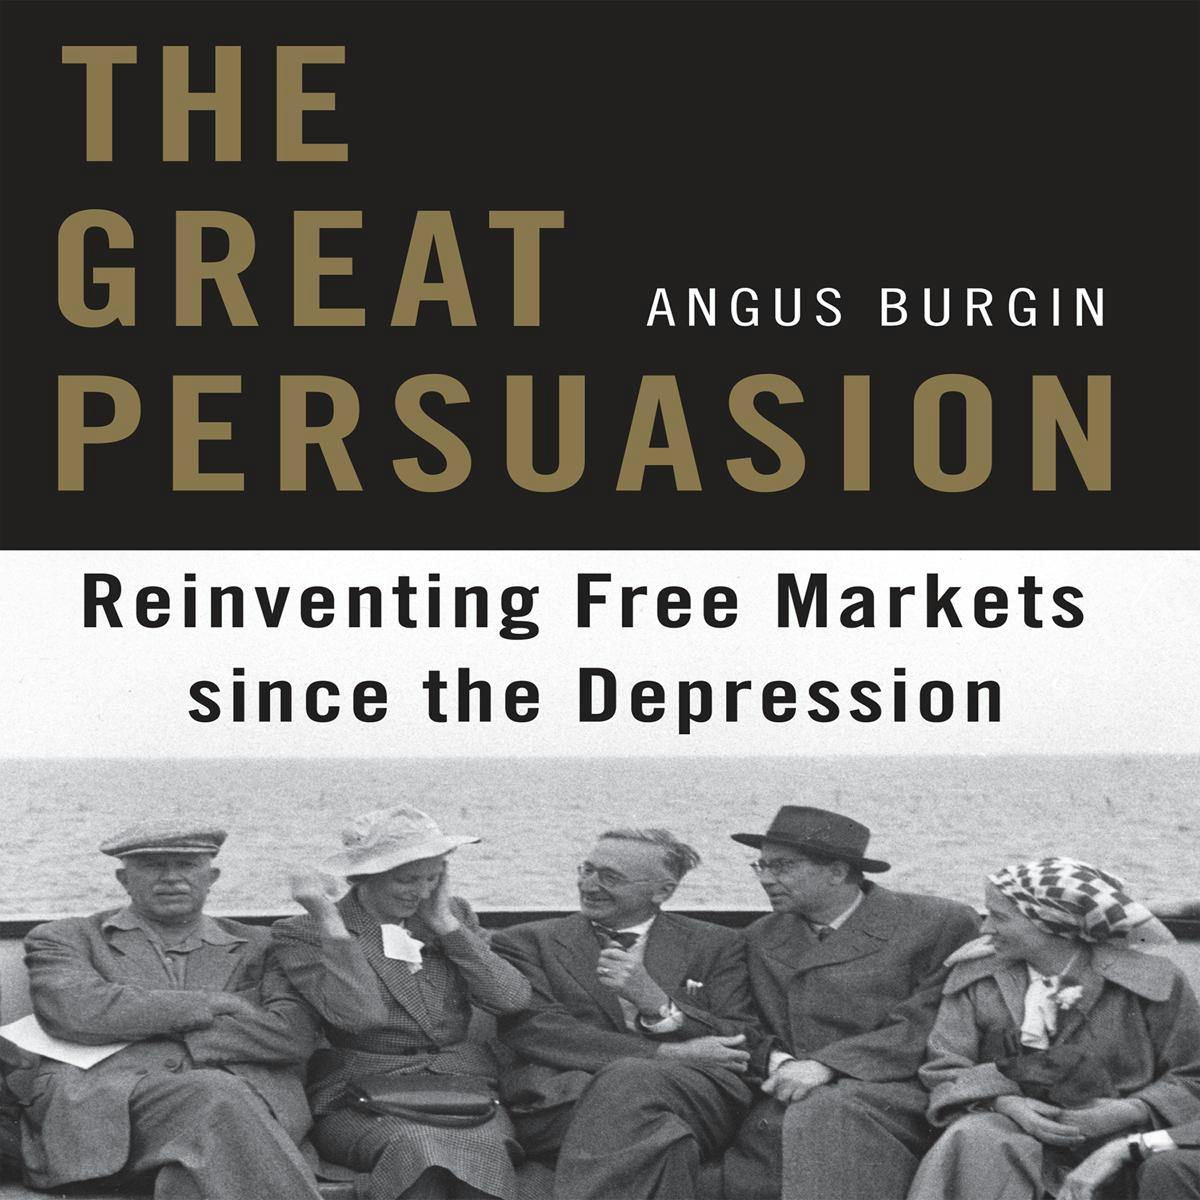 The Great Persuasion: Reinventing Free Markets Since the Depression - Angus Burgin